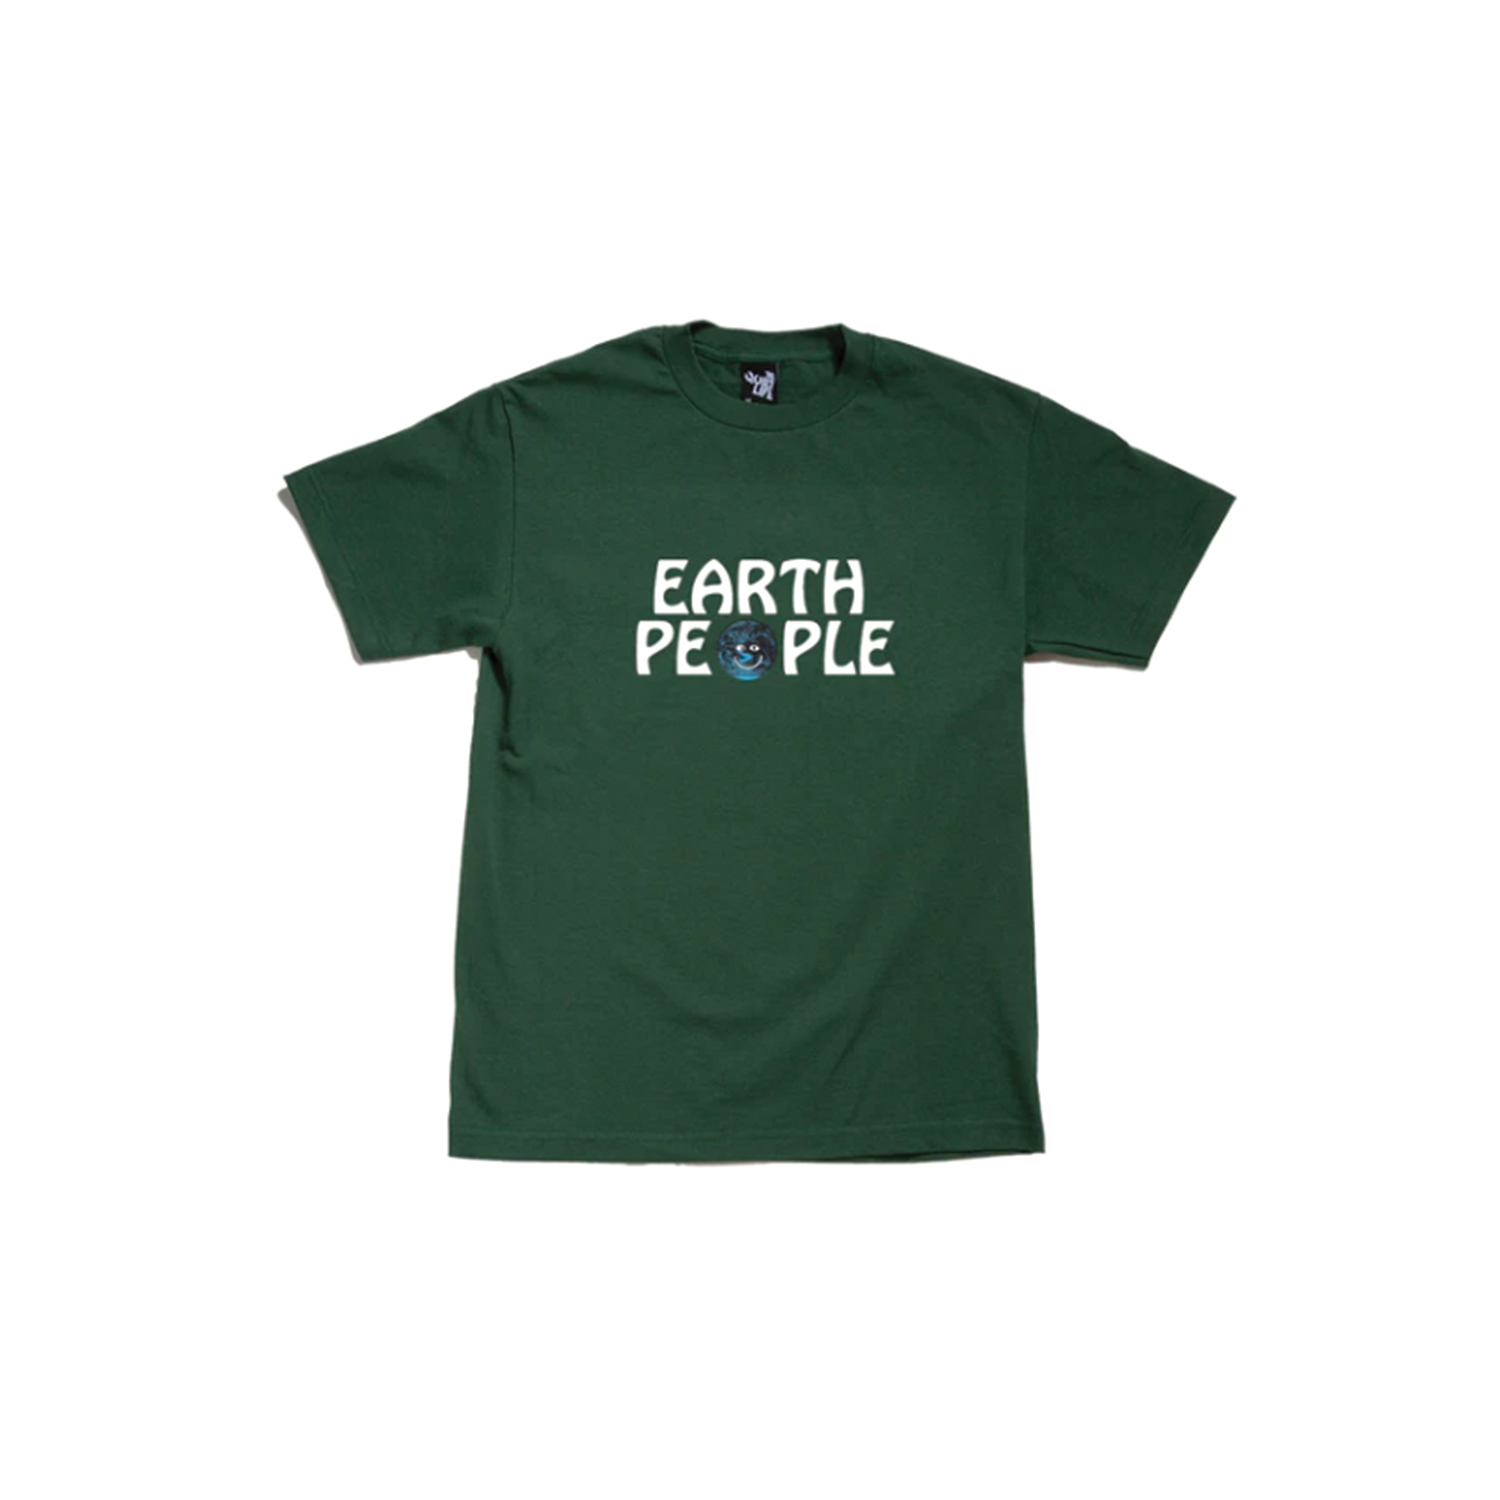 THE QUIET LIFE EARTH PEOPLE T-SHIRT